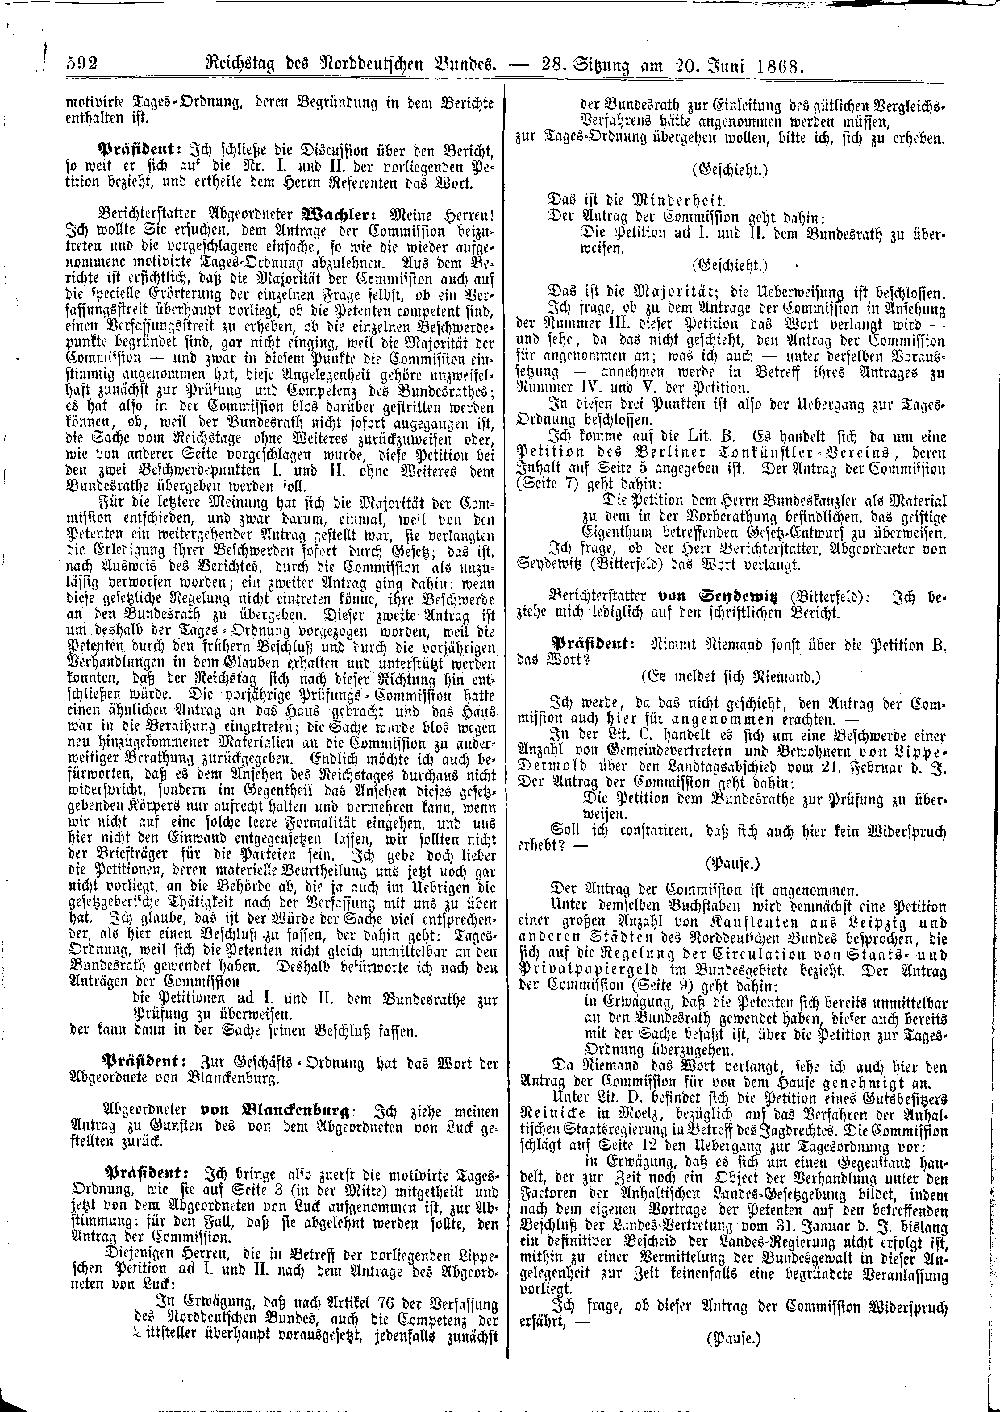 Scan of page 592